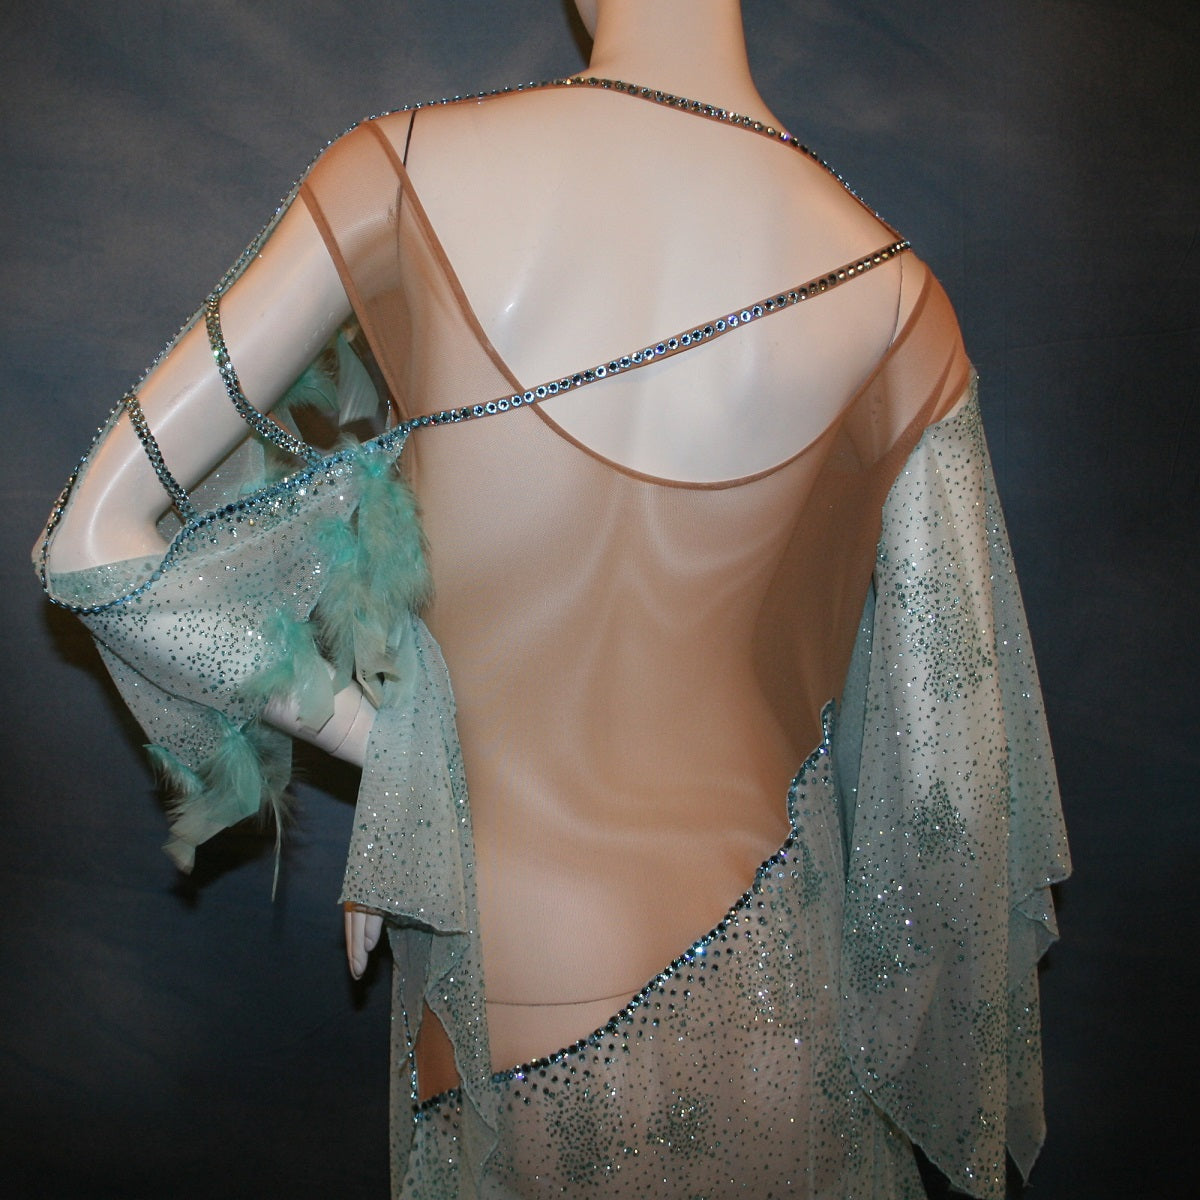 Crystal's Creations back detail view of Aqua blue ballroom dress created in gorgeous aqua blue glitter sheer mesh overlaid on a nude illusion base has lots of gorgeous aqua chandelle feathers, embellished with aquamarine Swarovski rhinestone work. This ballroom dress also features delicate Swarovski embellished strap detailing.